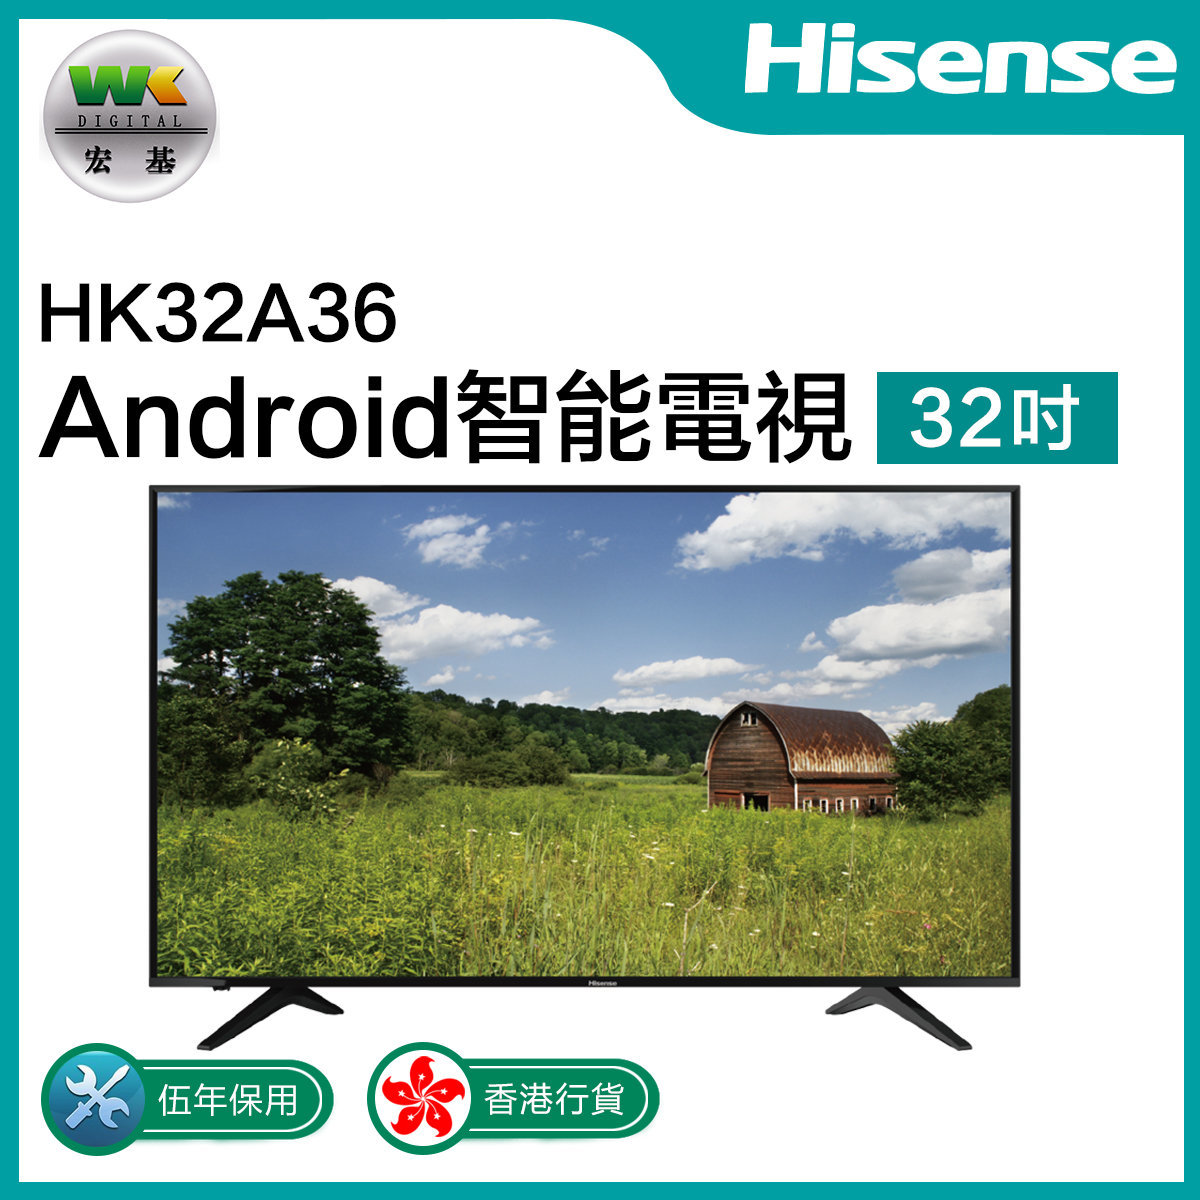 HK32A36 HD Smart TV 32 inches【Hong Kong licensed product】